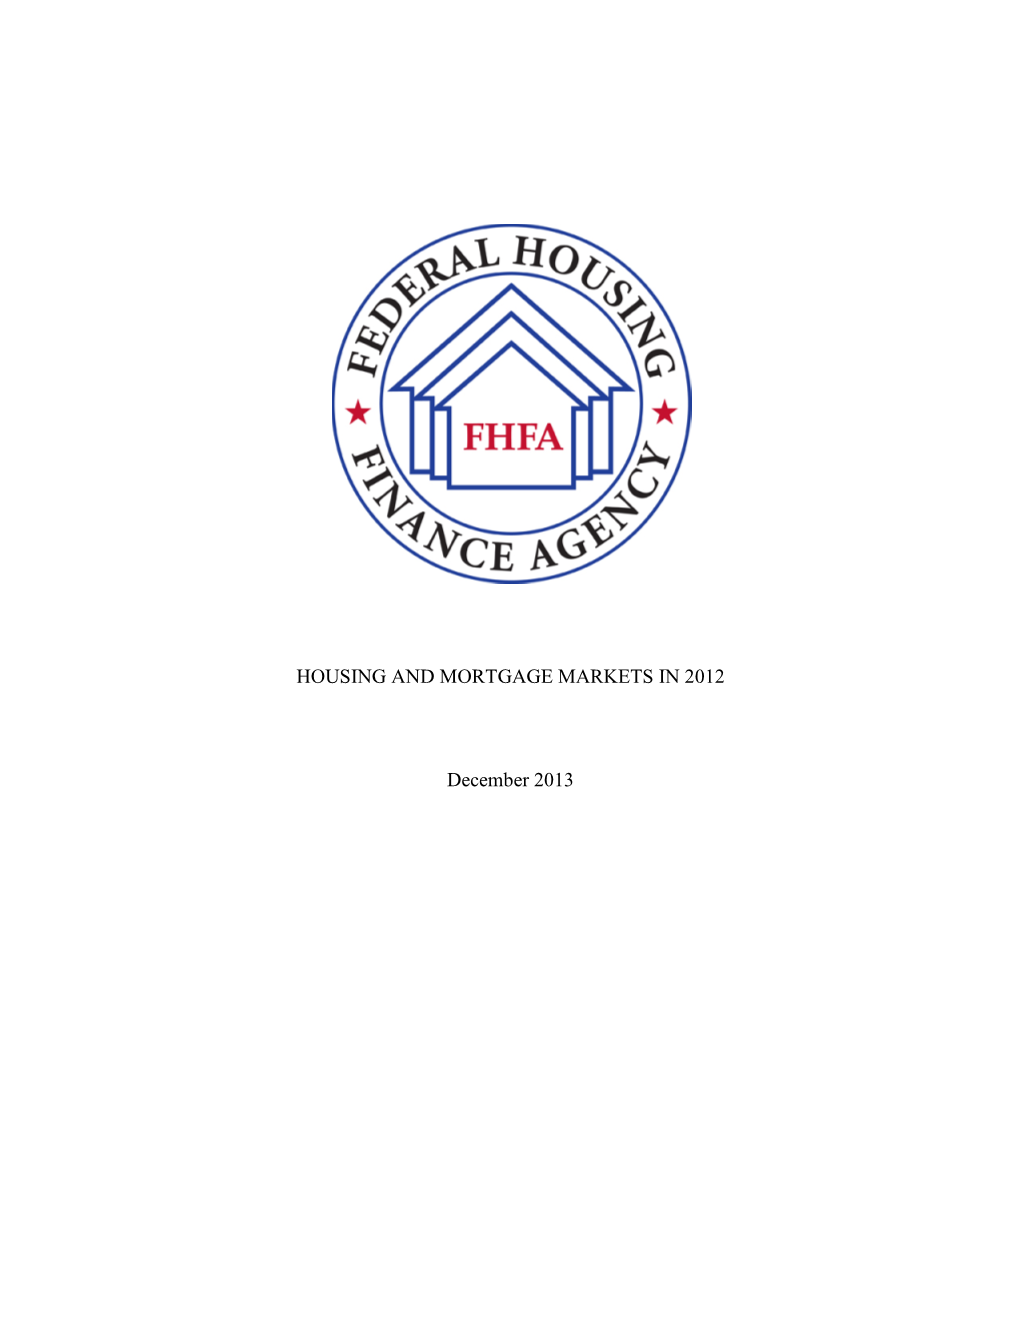 FHFA Research Paper: Housing and Mortgage Markets in 2012